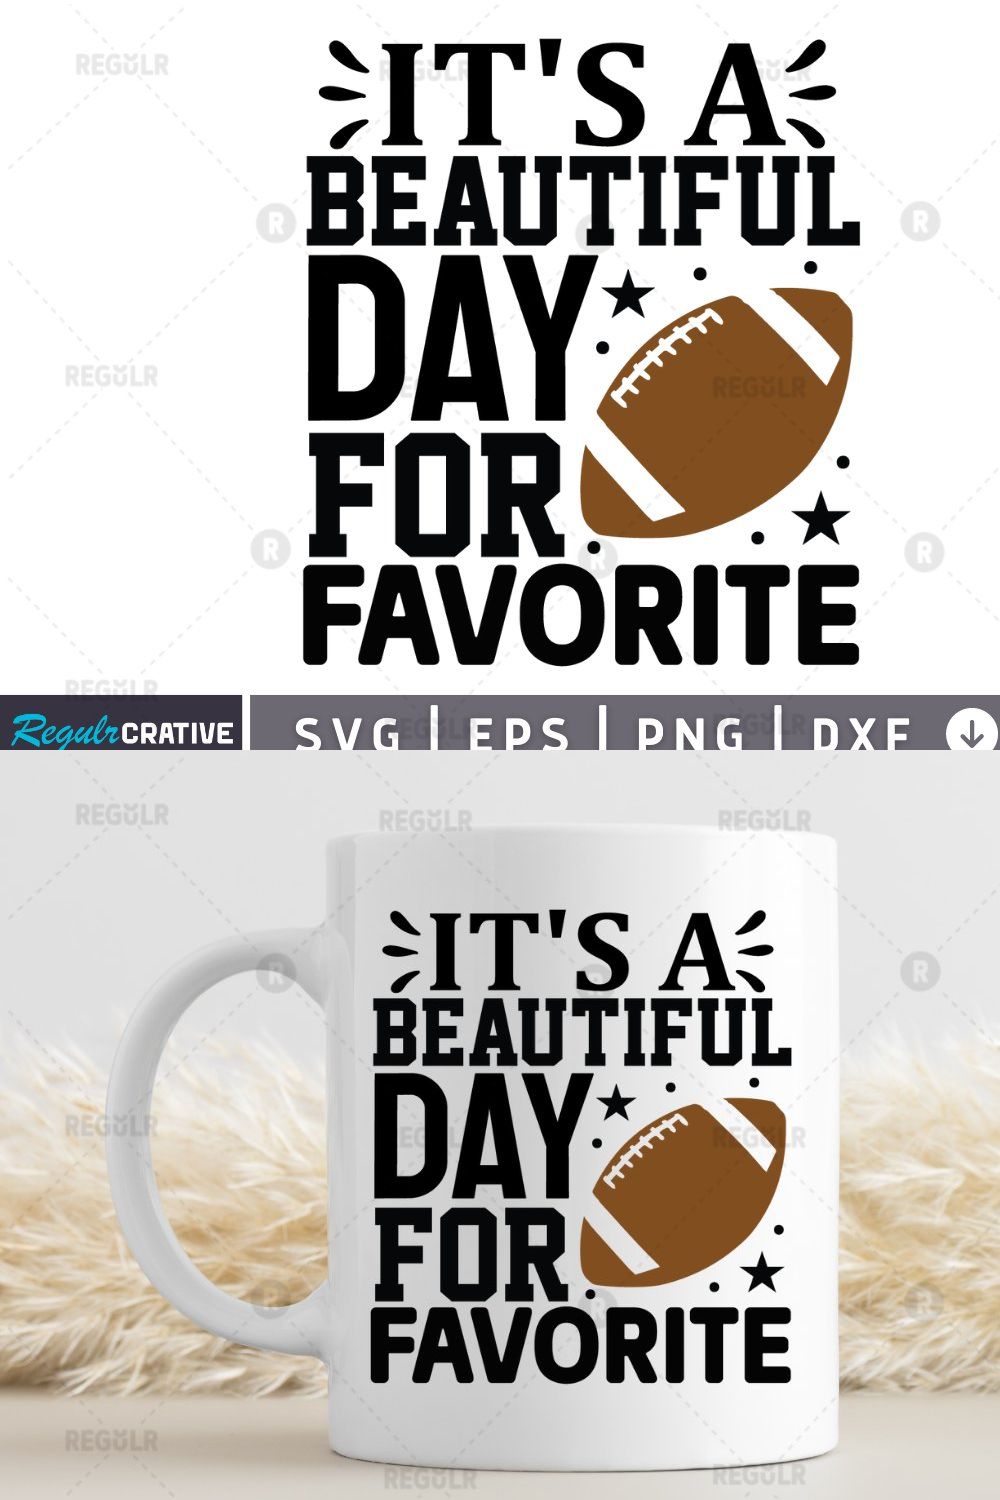 it's a beautiful day for football pinterest preview image.